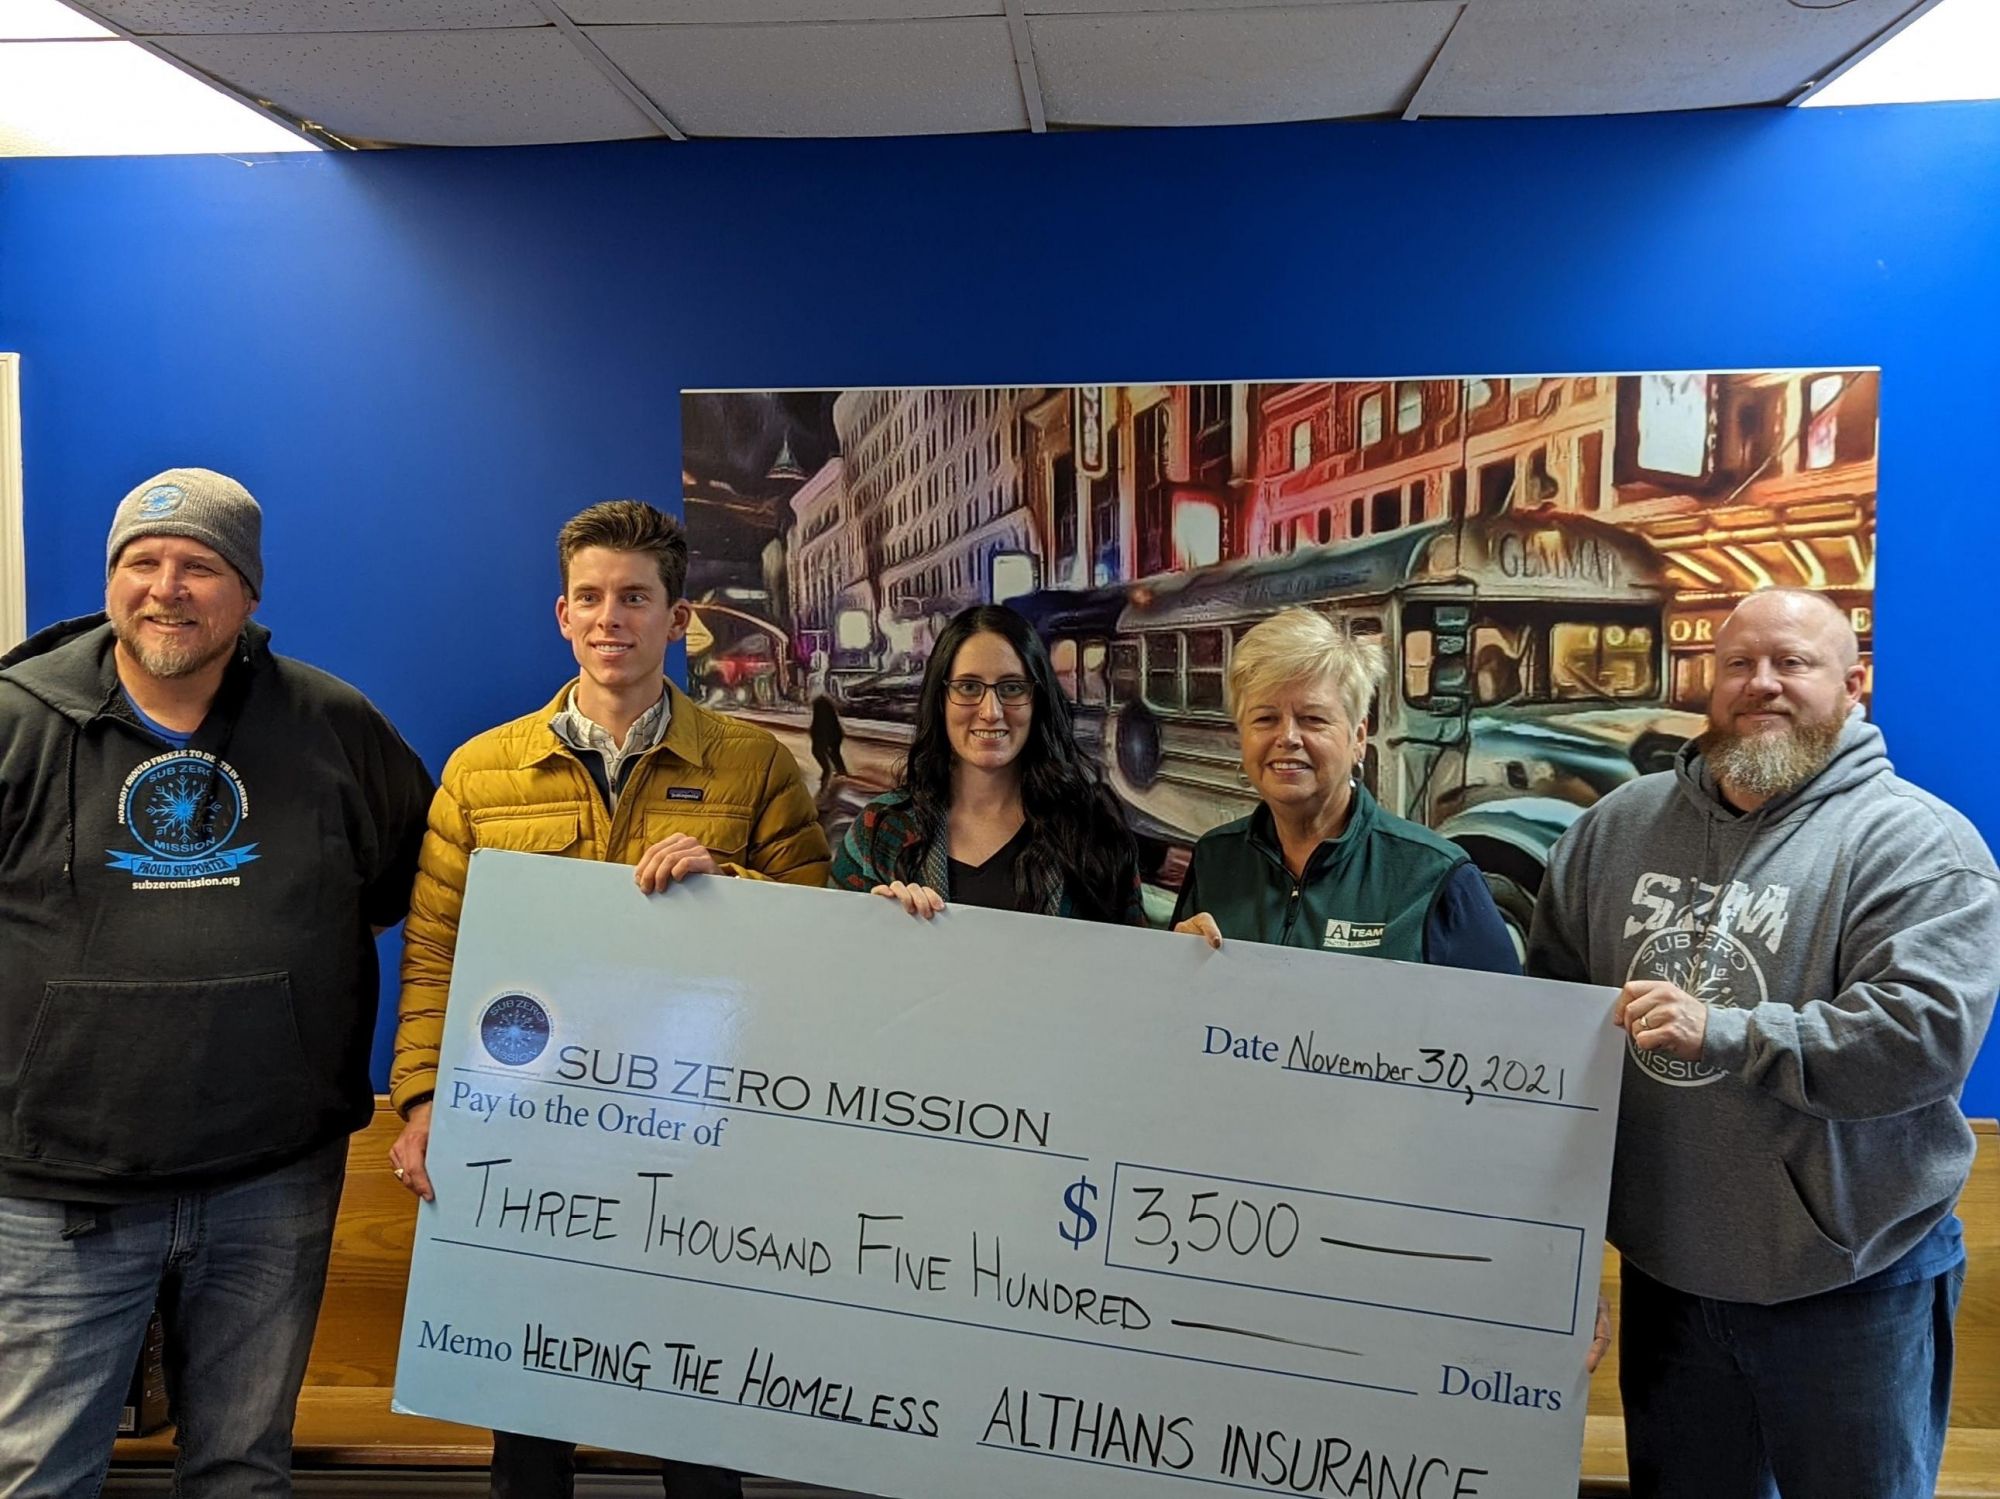 The sub zero mission team holding a large check